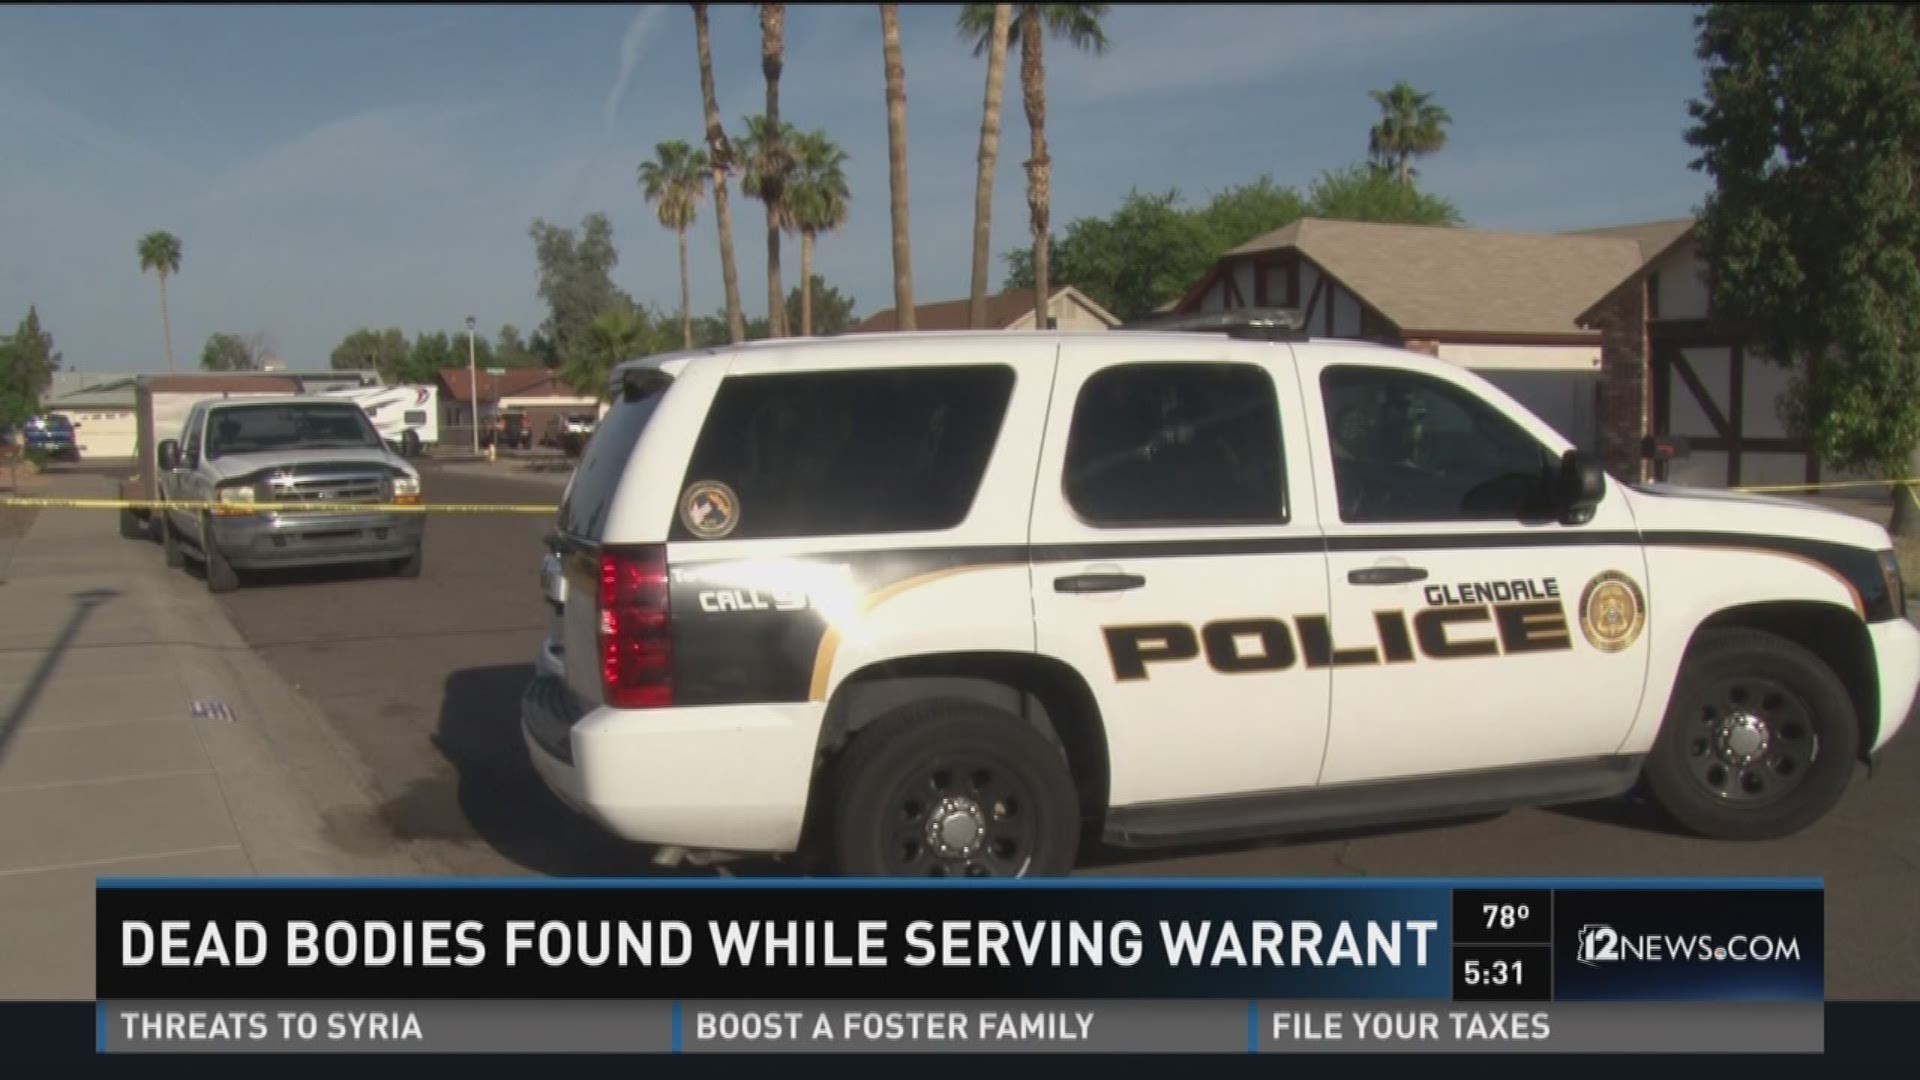 Dead bodies found while serving warrant